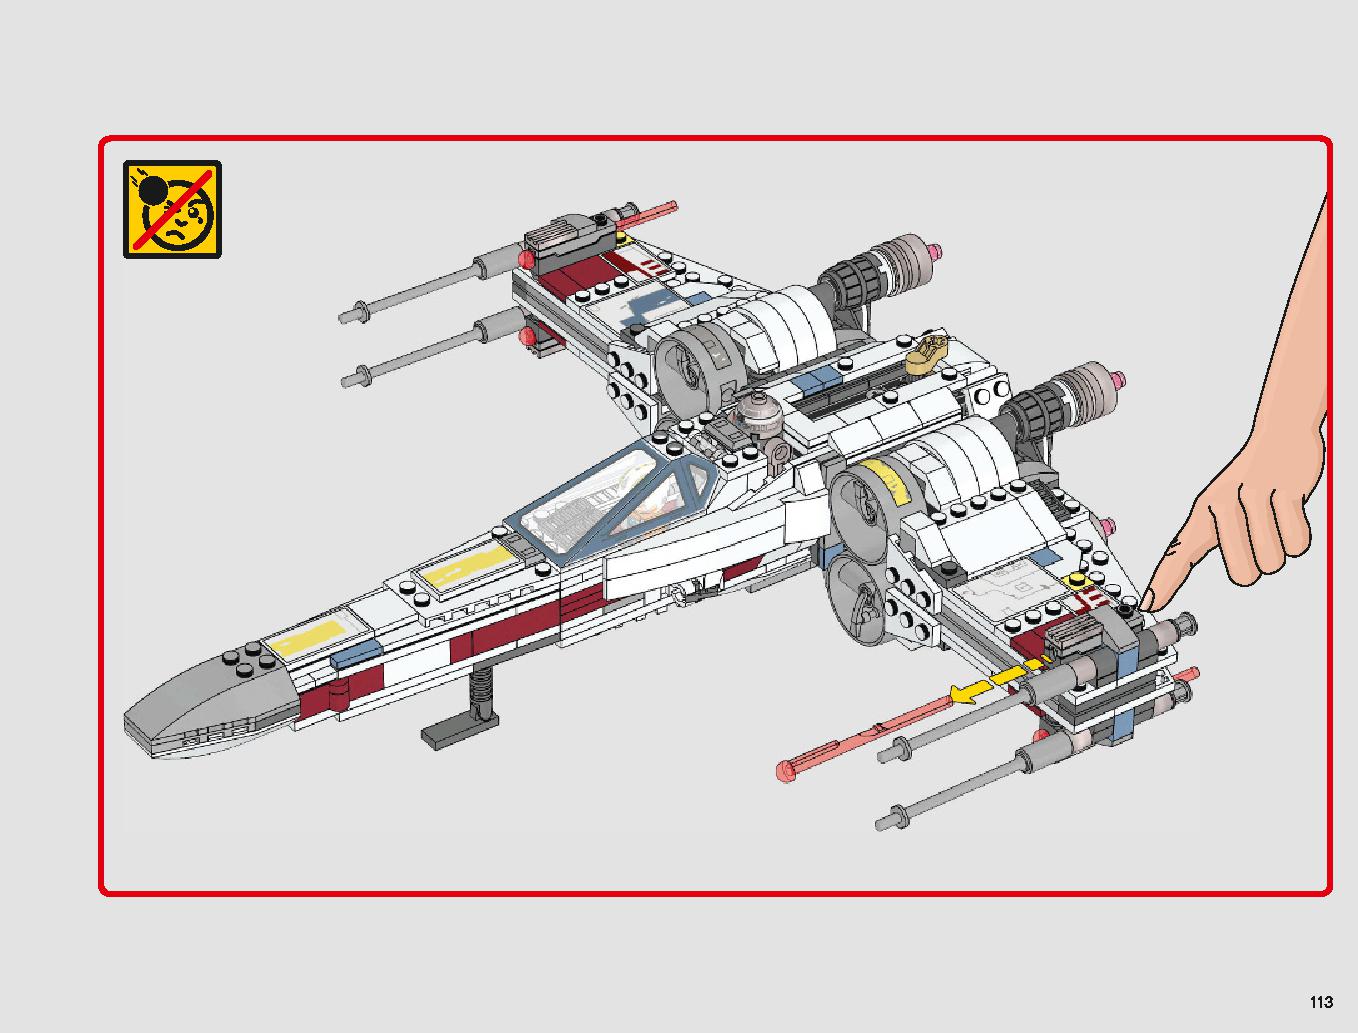 X-Wing Starfighter 75218 LEGO information LEGO instructions 113 page